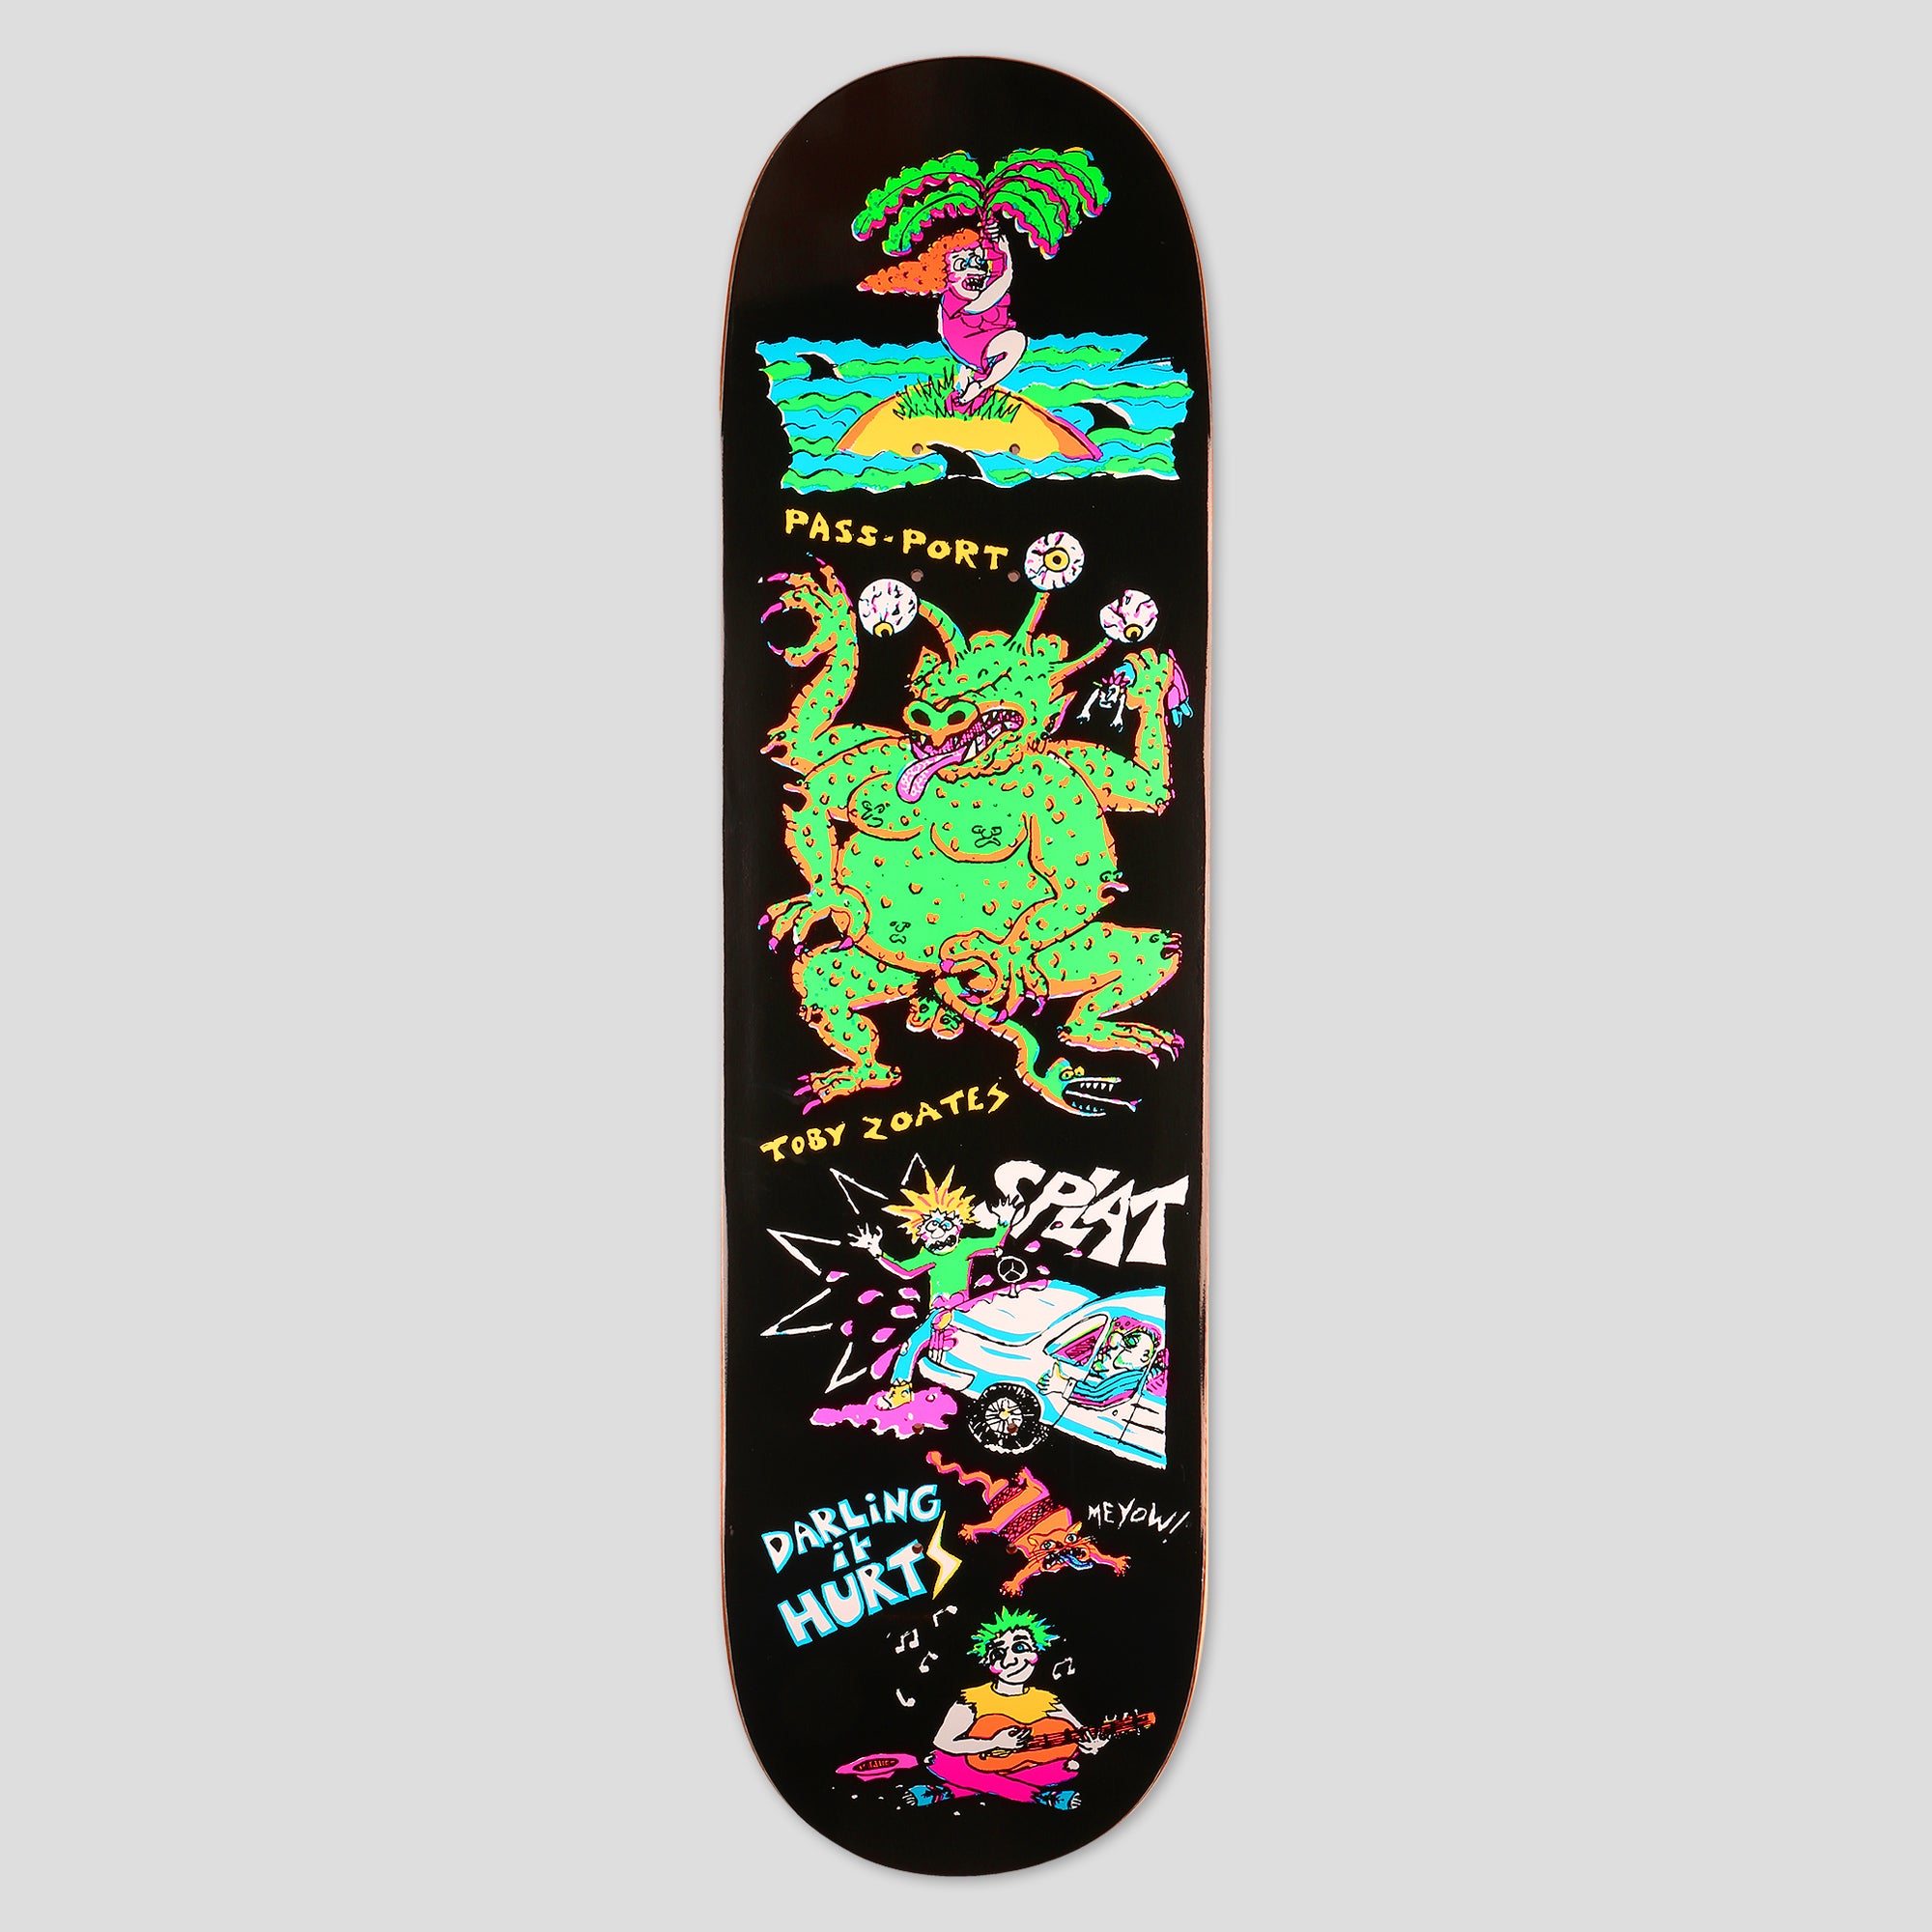 PASS~PORT "DARLING" TOBY ZOATES SERIES DECK